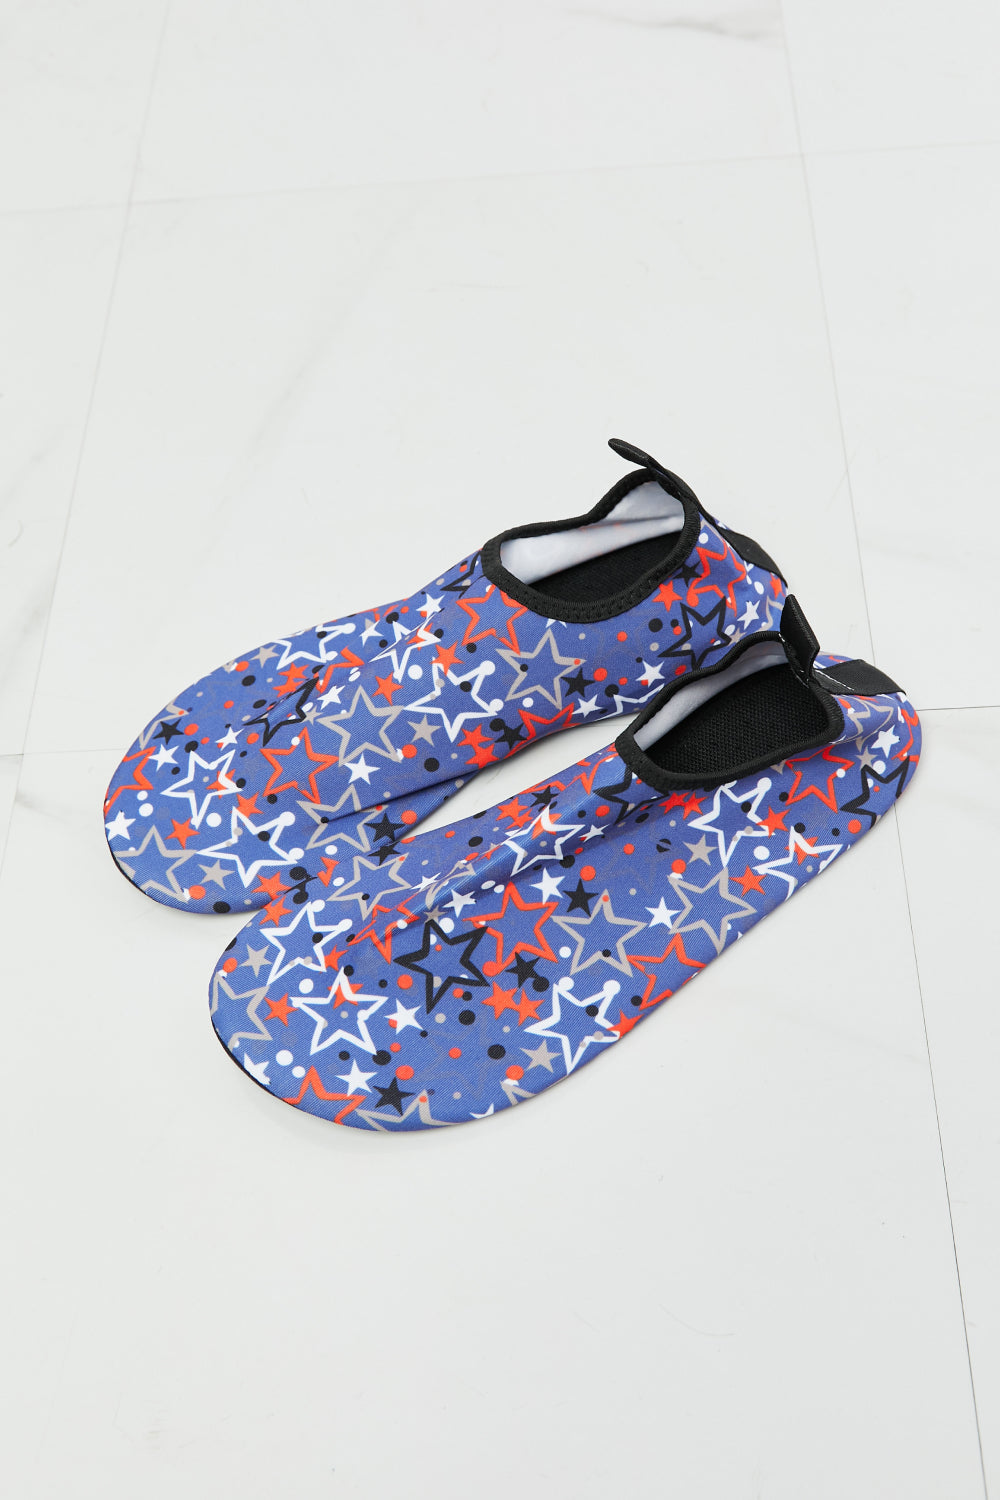 MMshoes On The Shore Water Shoes in Navy  Sunset and Swim   